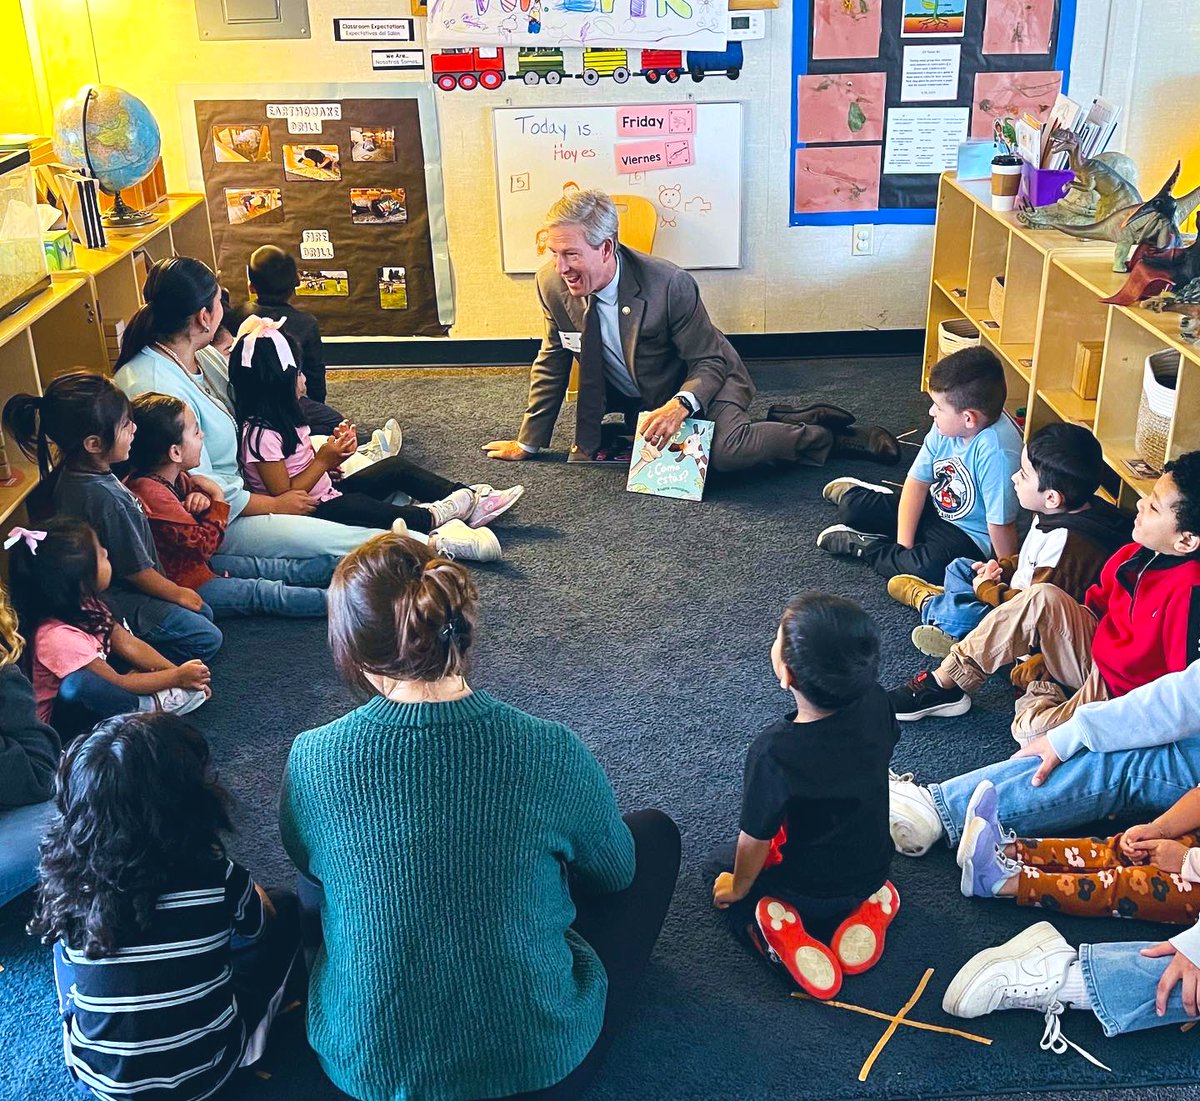 DA Nasarenko spent part of his morning reading to preschoolers at Fred Williams Elementary in Oxnard. Reading to kids early & often increases chances of success in school and life. 

@First5Ventura encourages everyone to Talk, Read, Sing to our children every day. #Take5VC